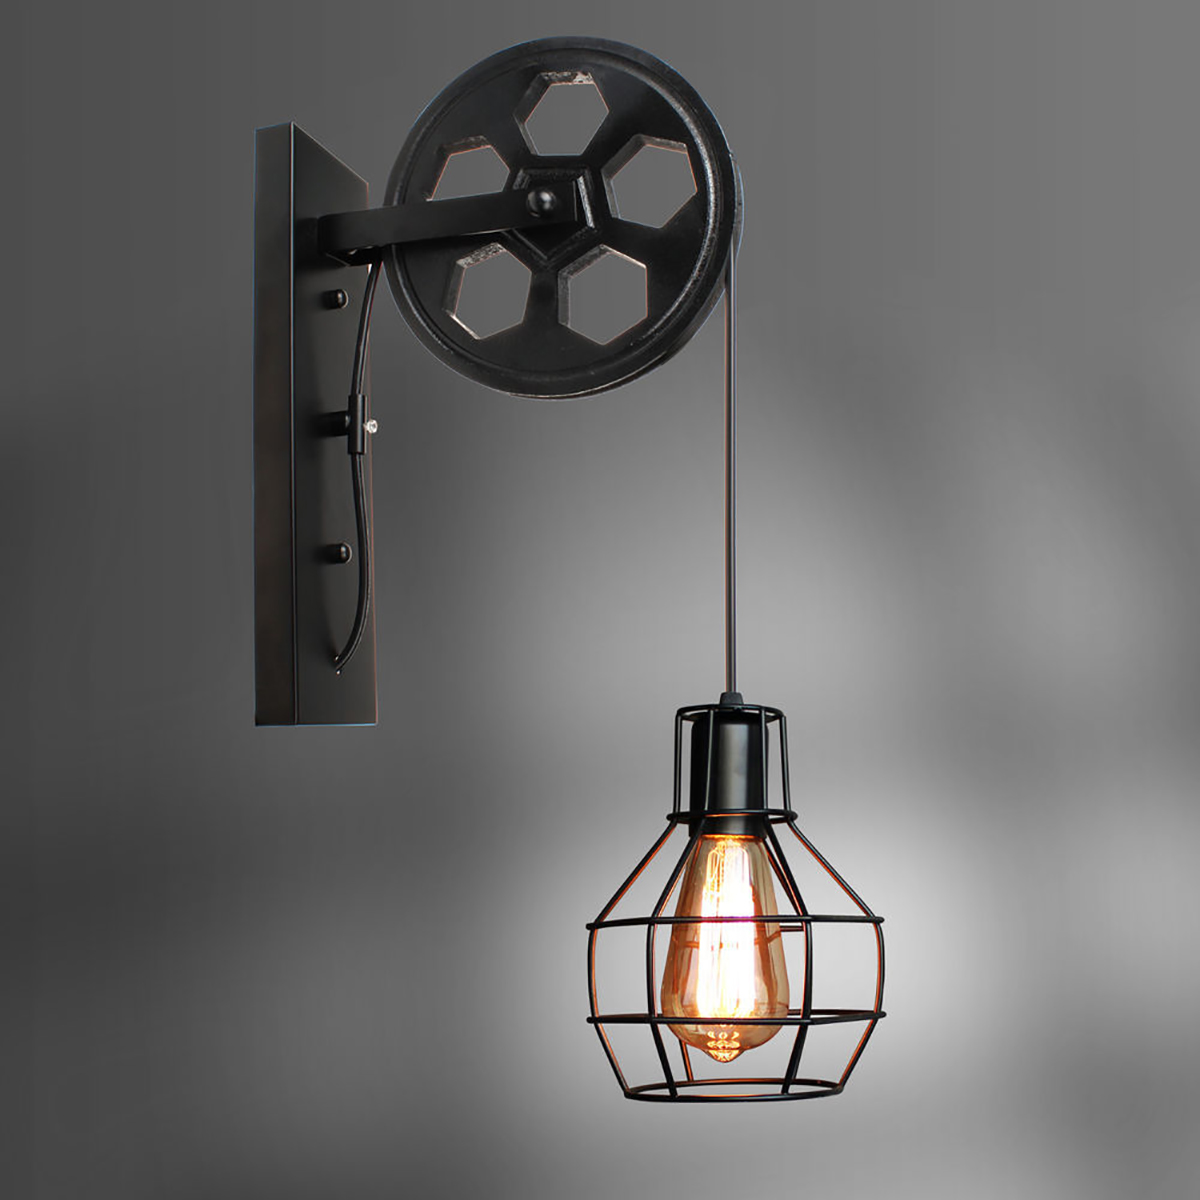 Adjustable-Retro-Iron-Wall-Lamp-Lifting-Pulley-E27-Sconce-Light-Indoor-4-Color-Without-Light-Bulb-1709520-8